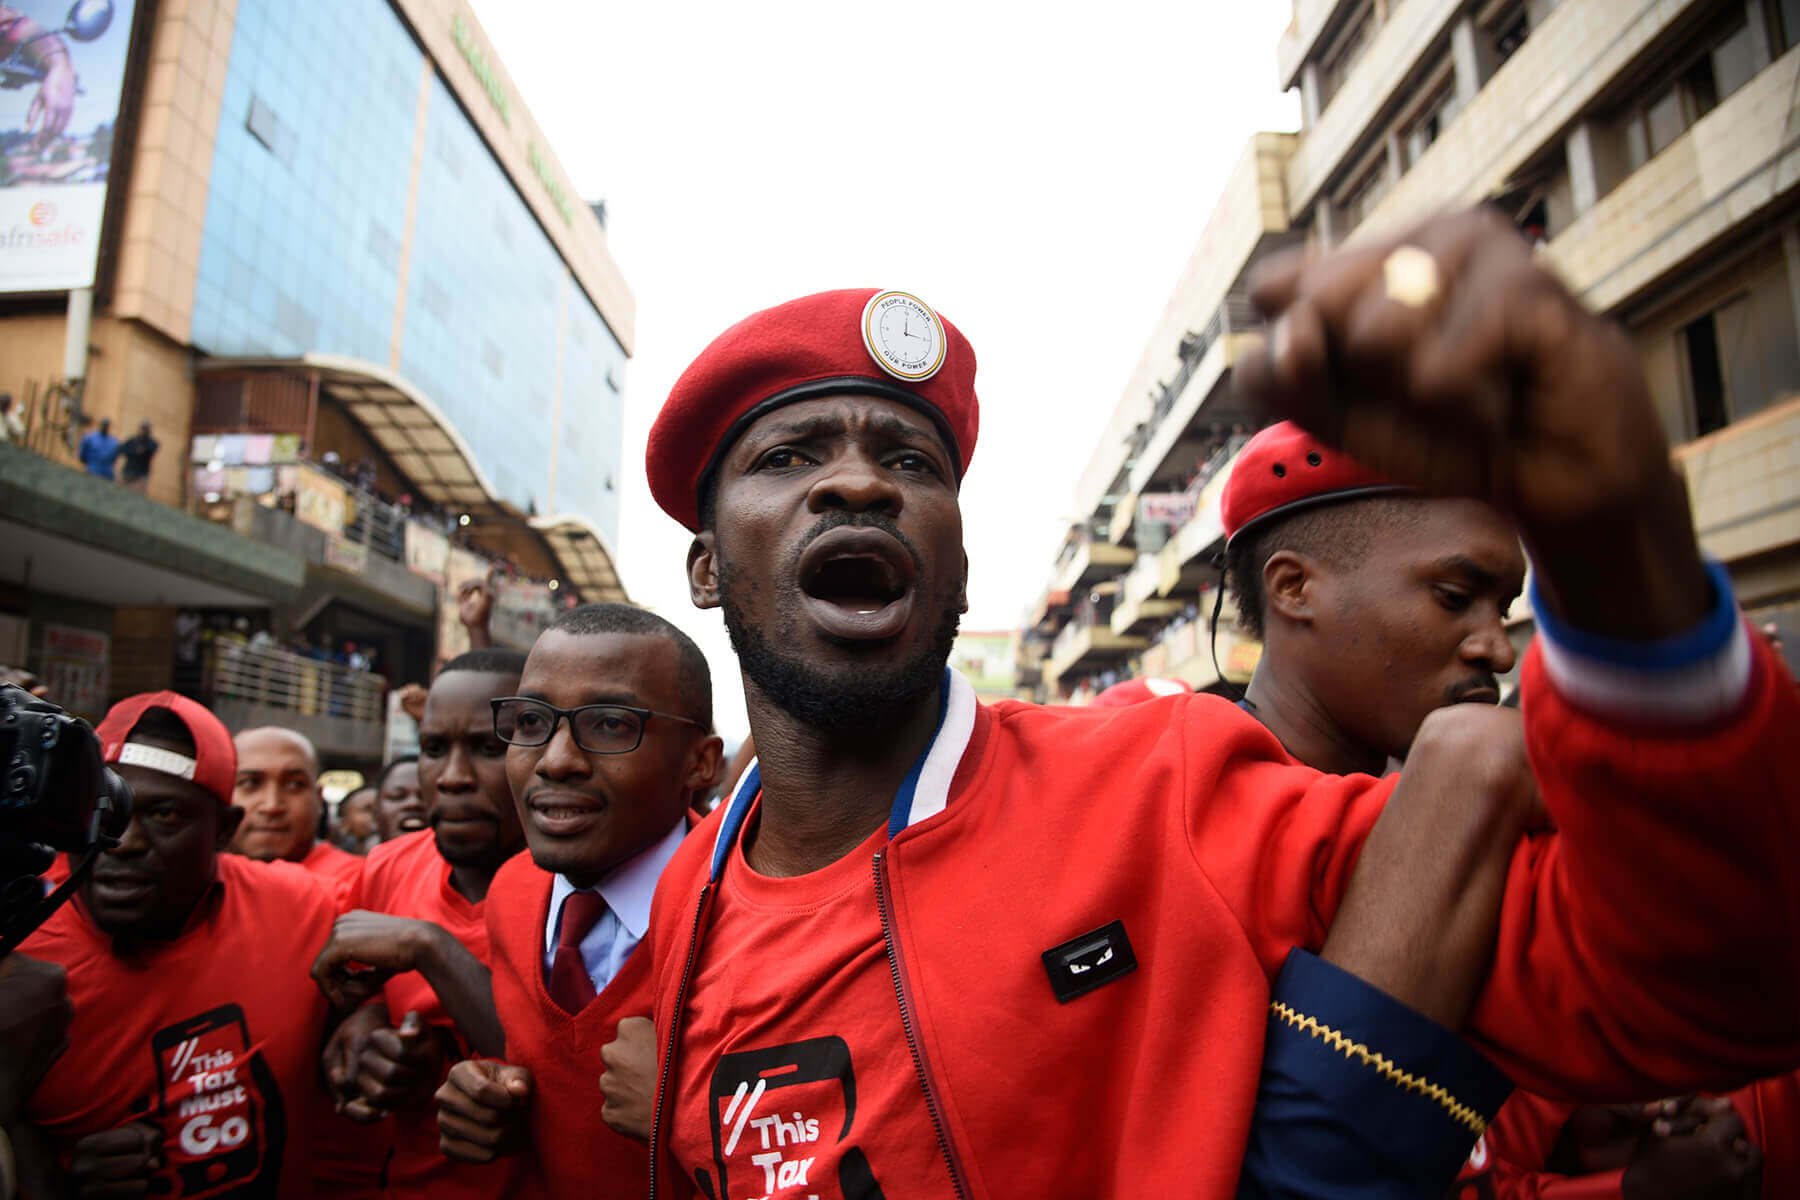 Ugandan Opposition Candidate Bobi Wine Briefly Suspends Campaign After Being Attacked